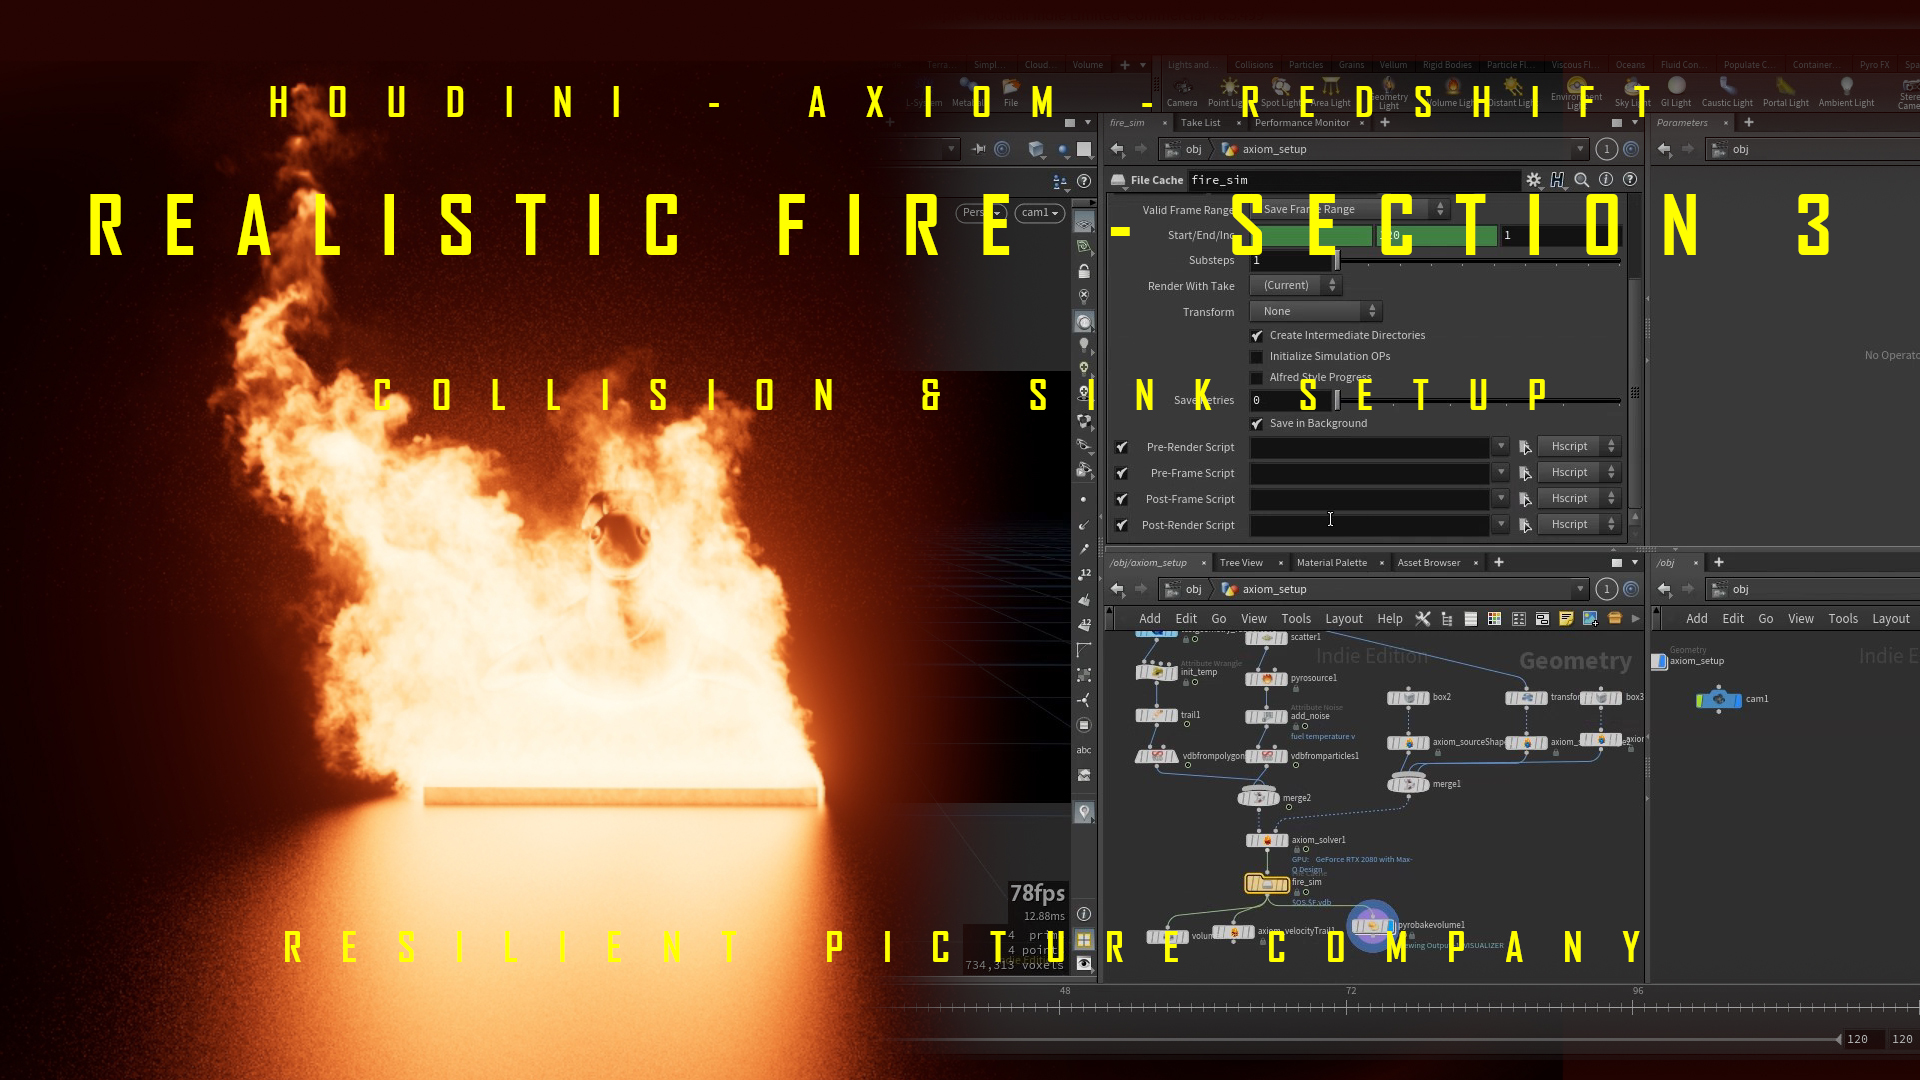 REALISTIC FIRE - SECTION 3